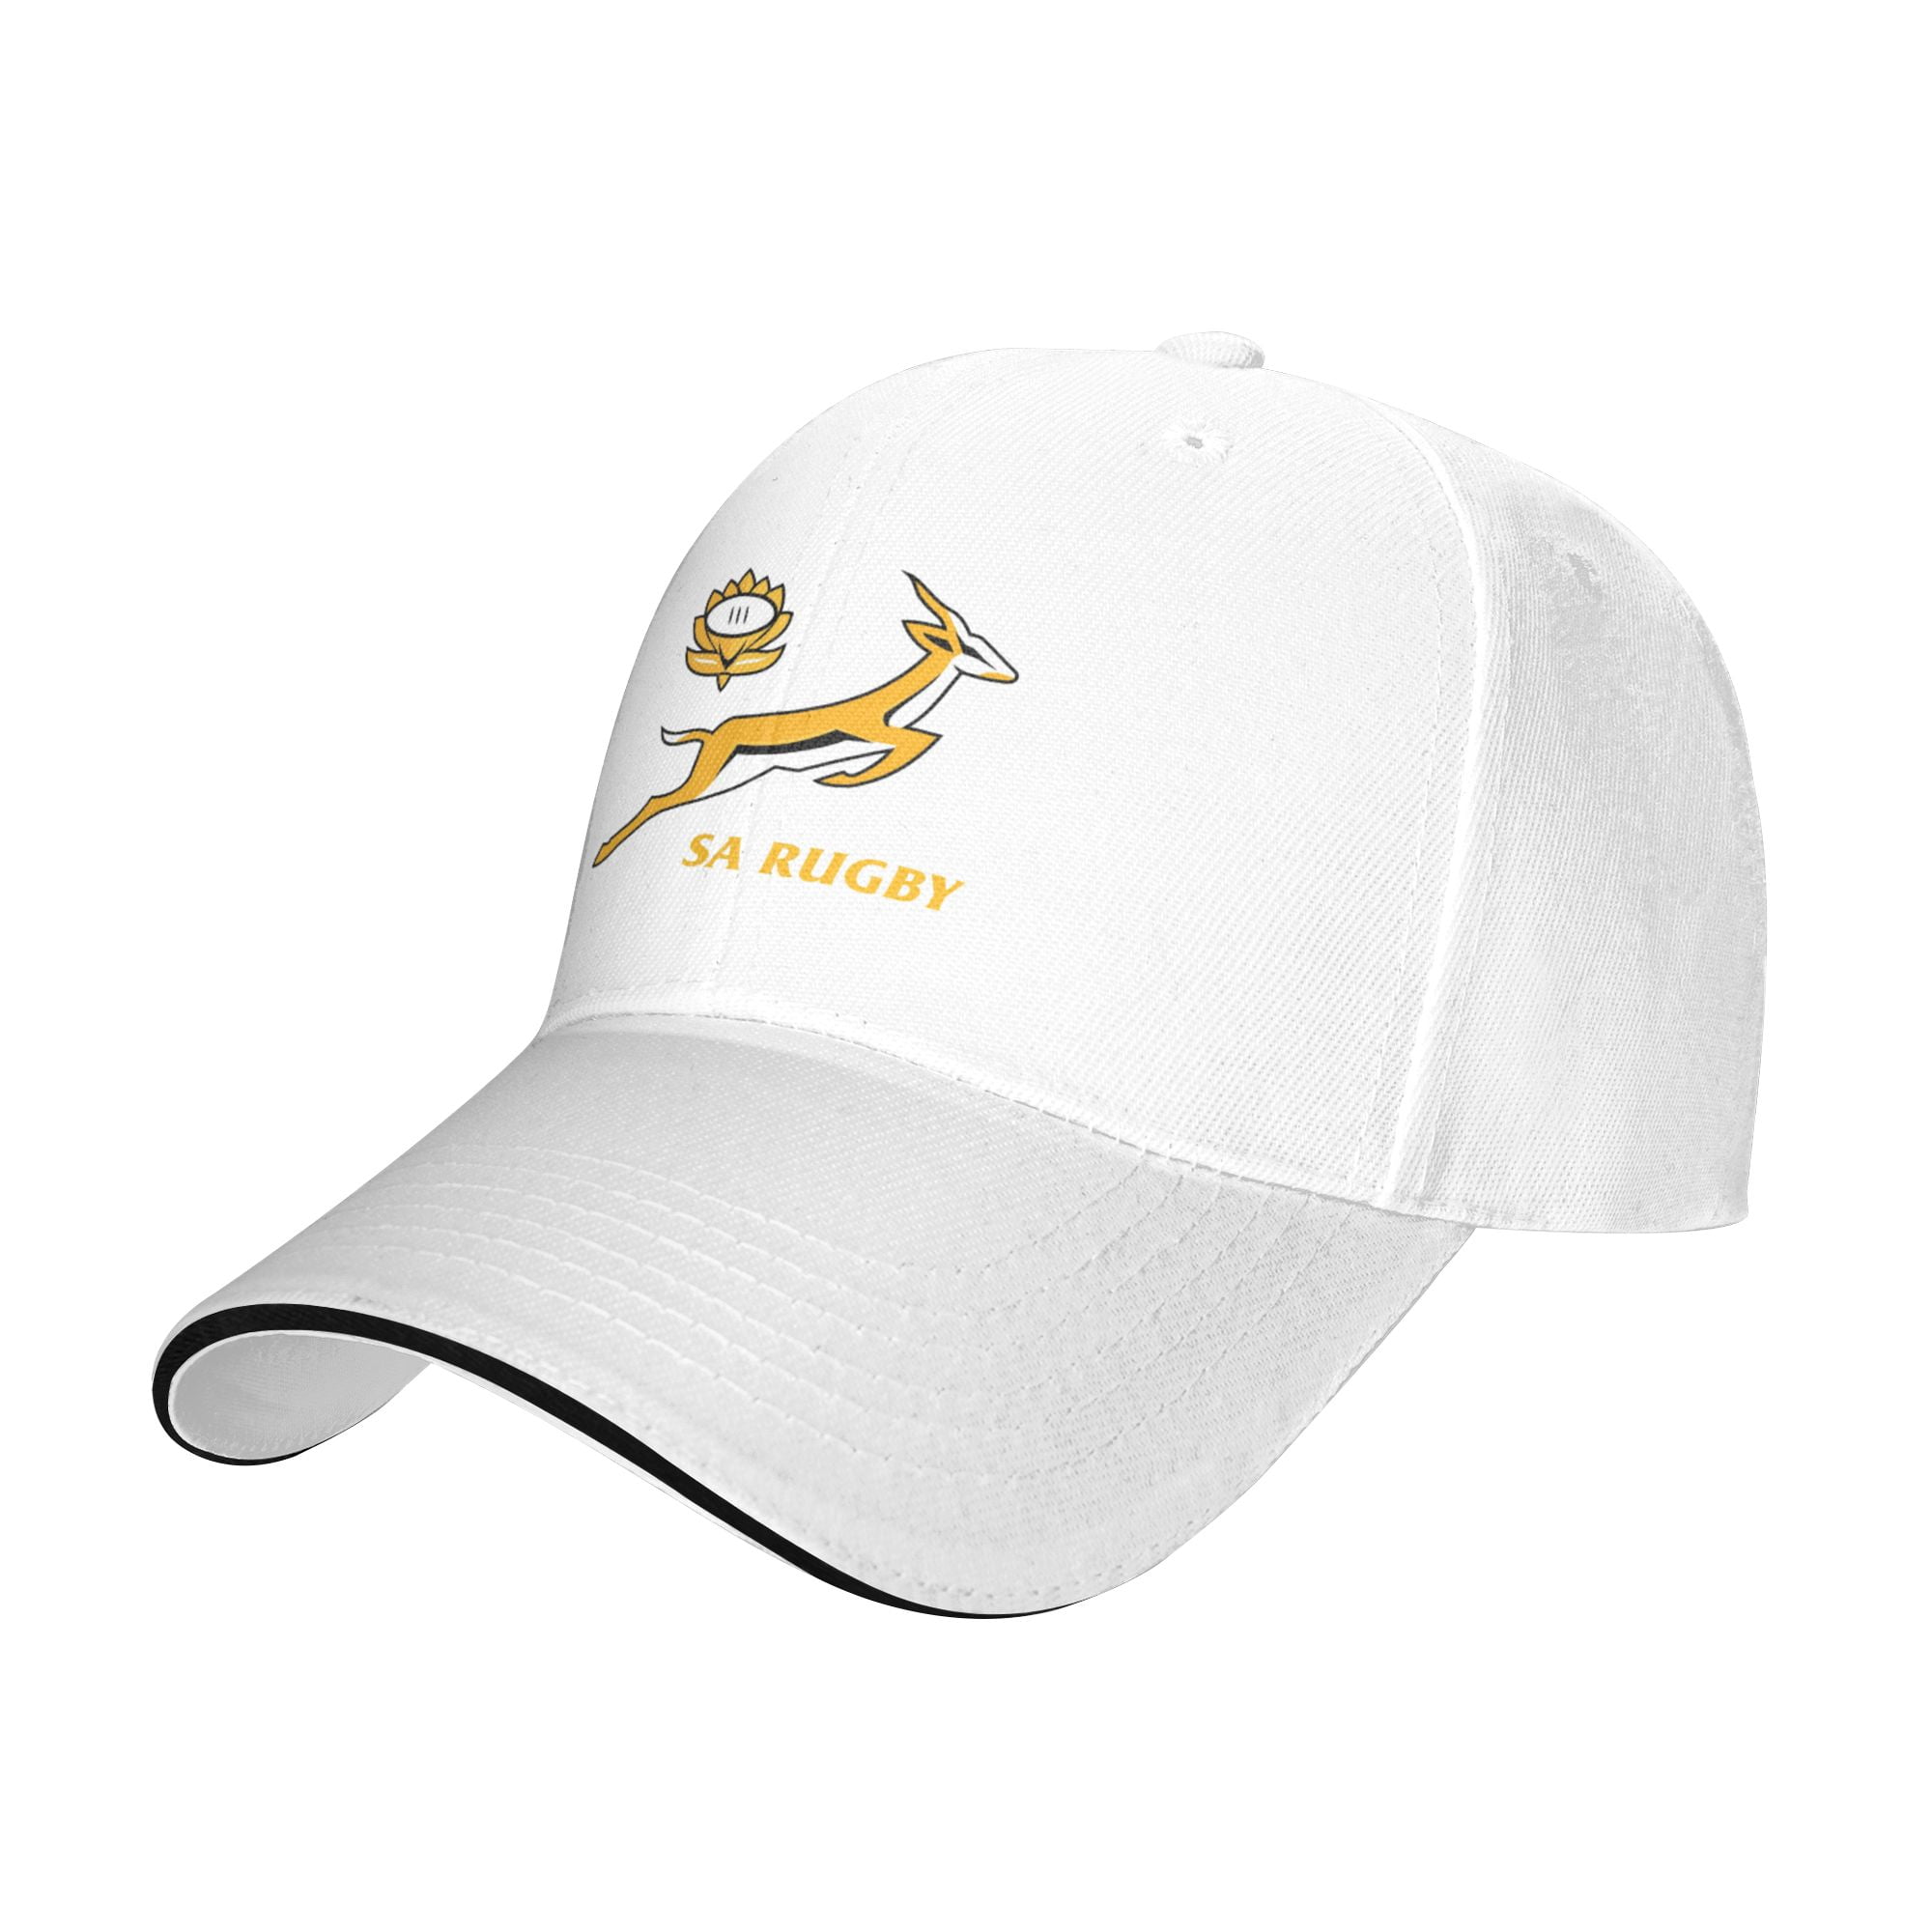 Springbok Rugby South Africa casquette White One Size Adjustable Snapback Hat